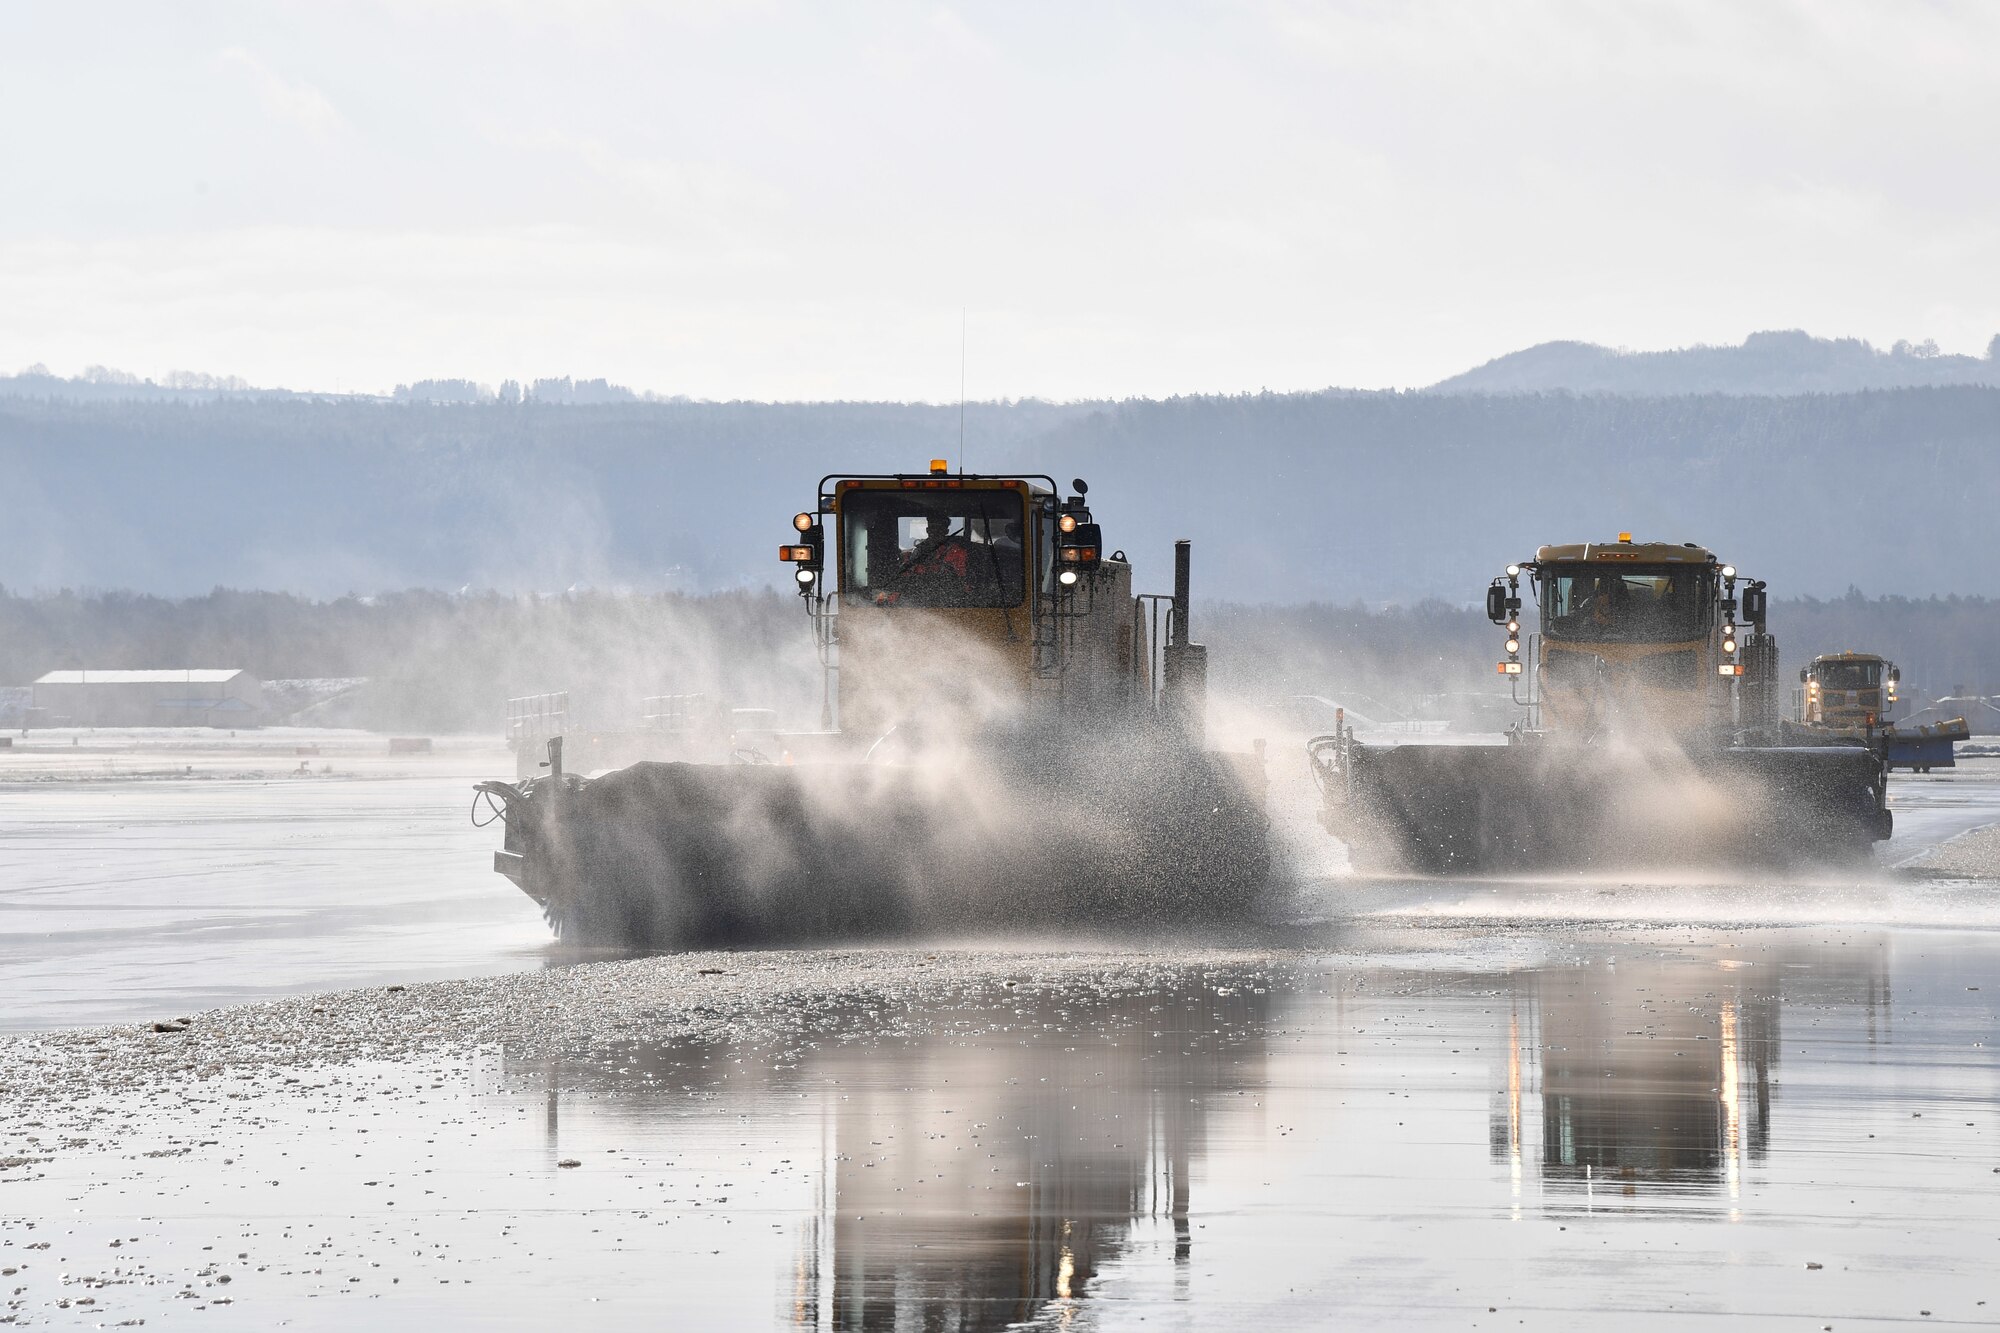 Members of the 786th Civil Engineer Squadron snow operations team drive Oshkosh Snow Broom snow removal vehicles across an airfield ramp to sweep away remaining snow and ice after winter weather on Ramstein Air Base, Germany, Feb. 28, 2020.